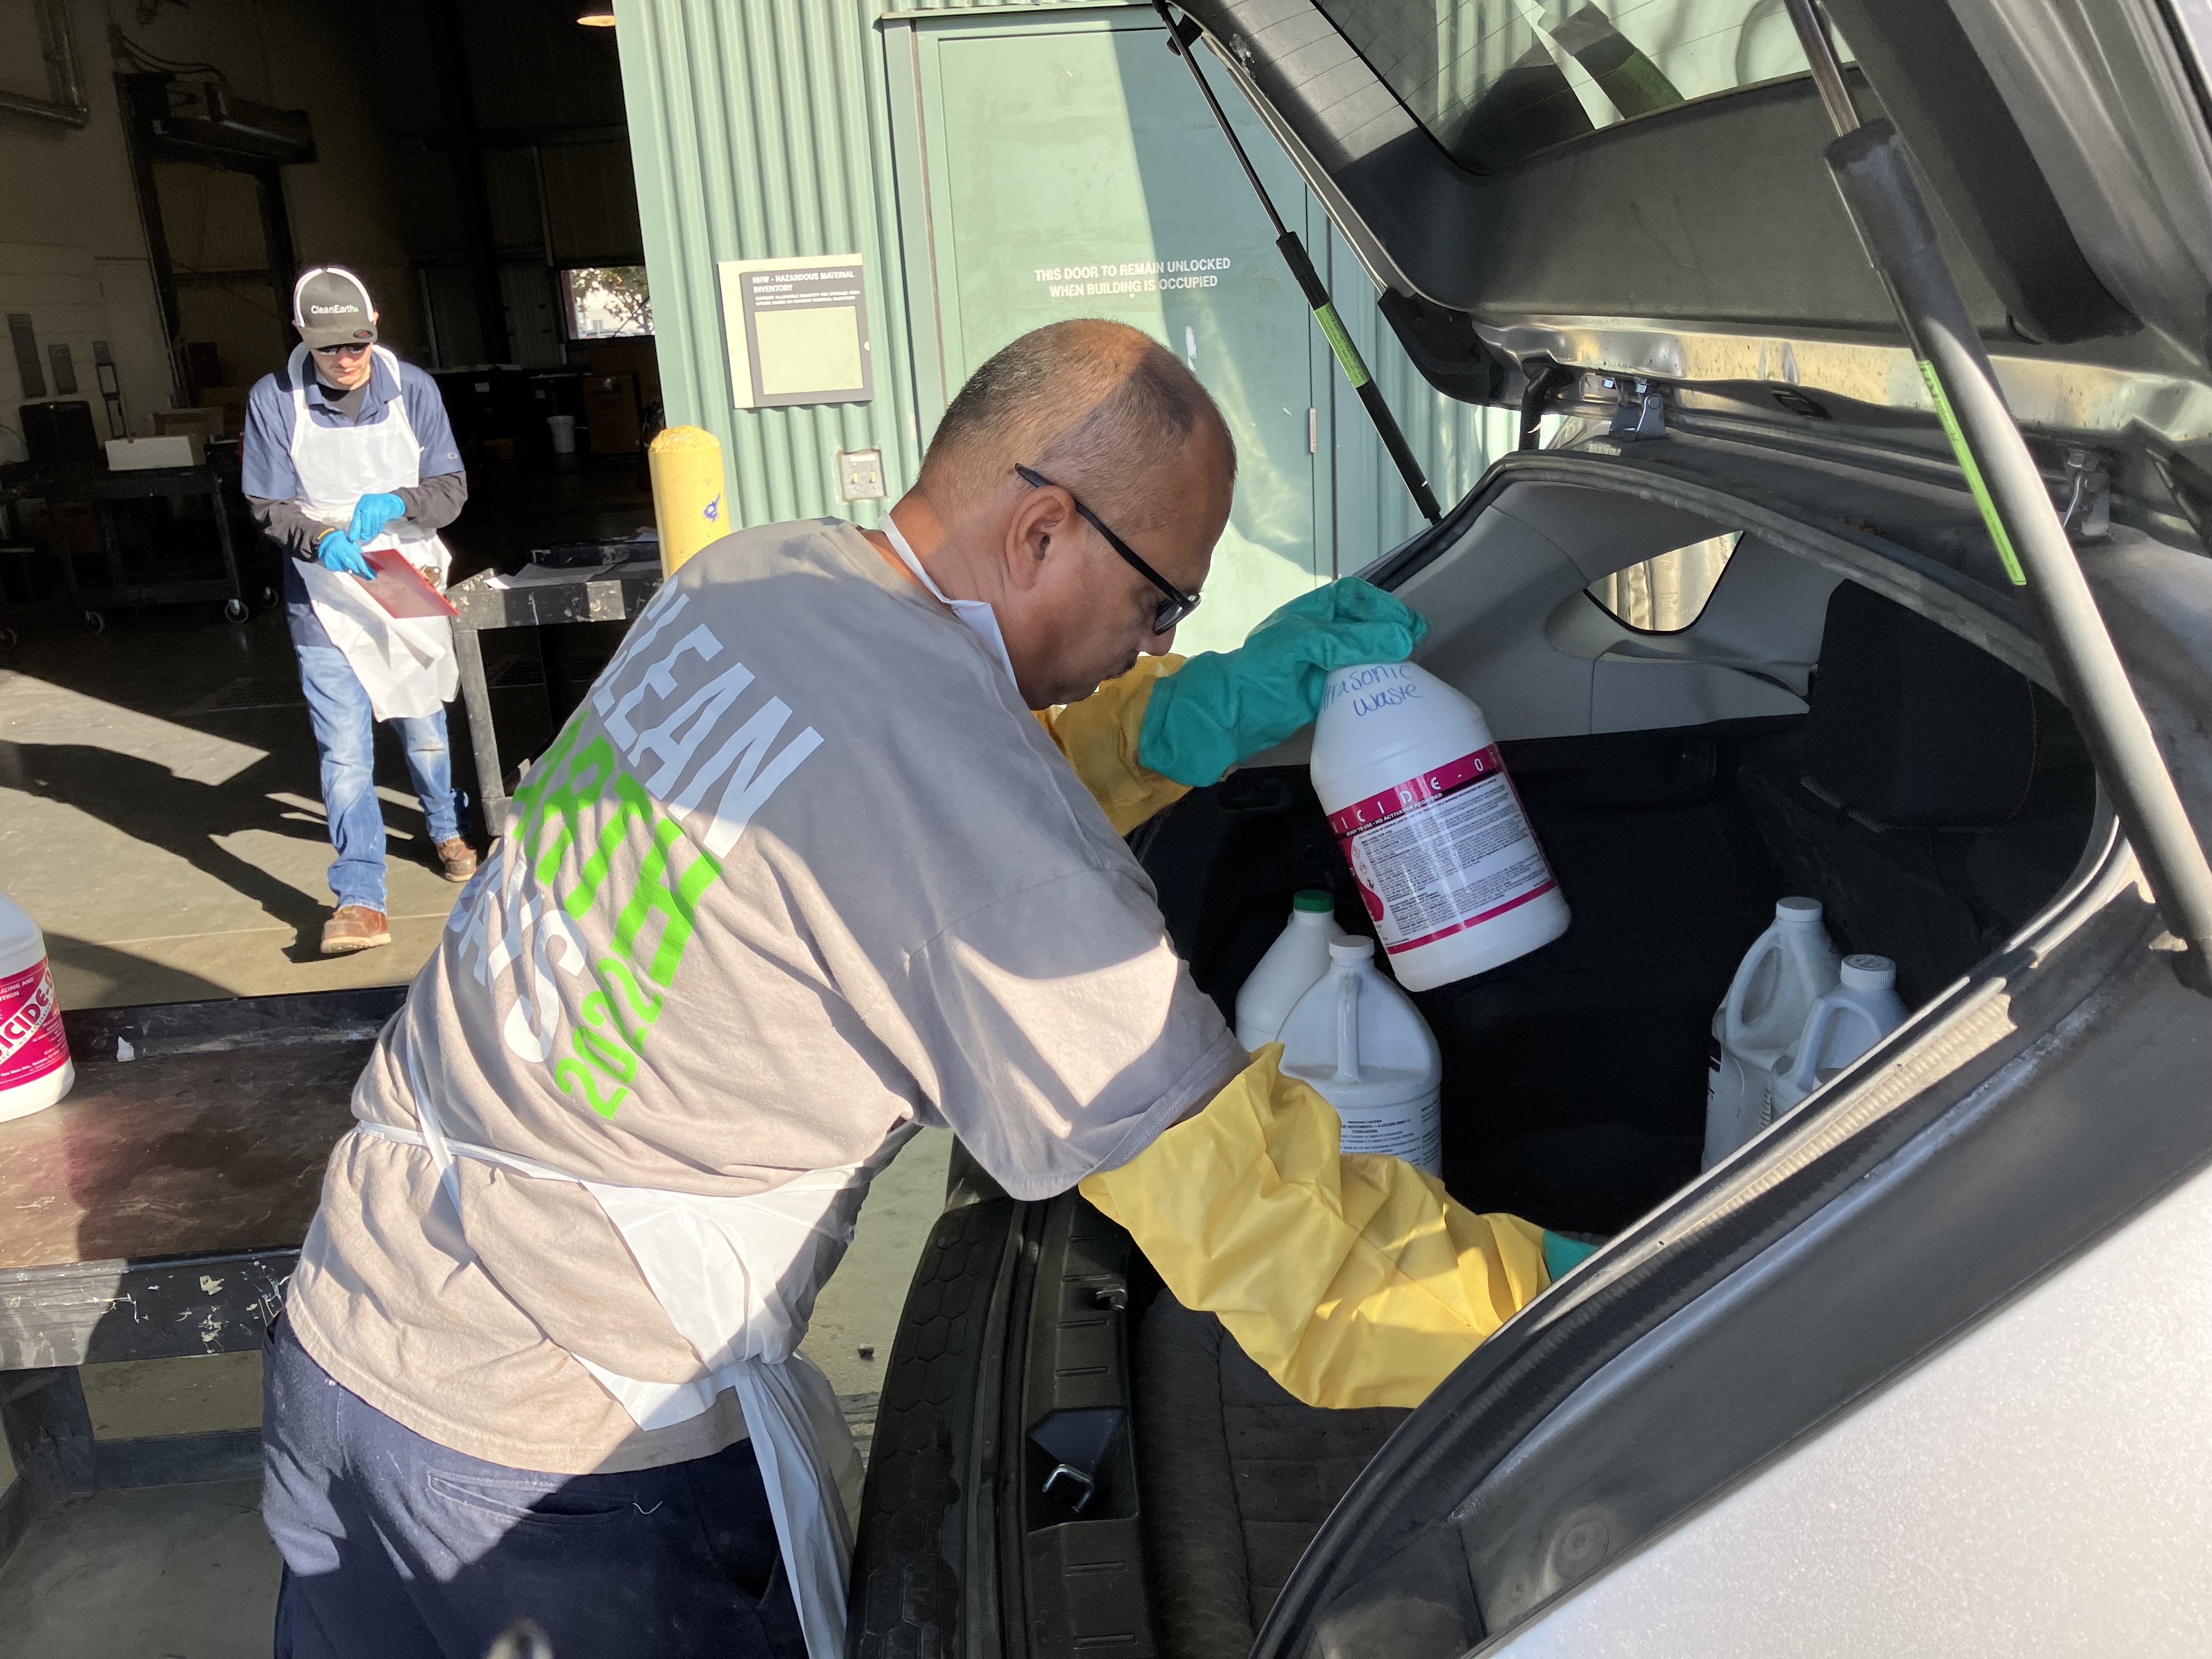 A technician removes hazardous waste from a vehicle.